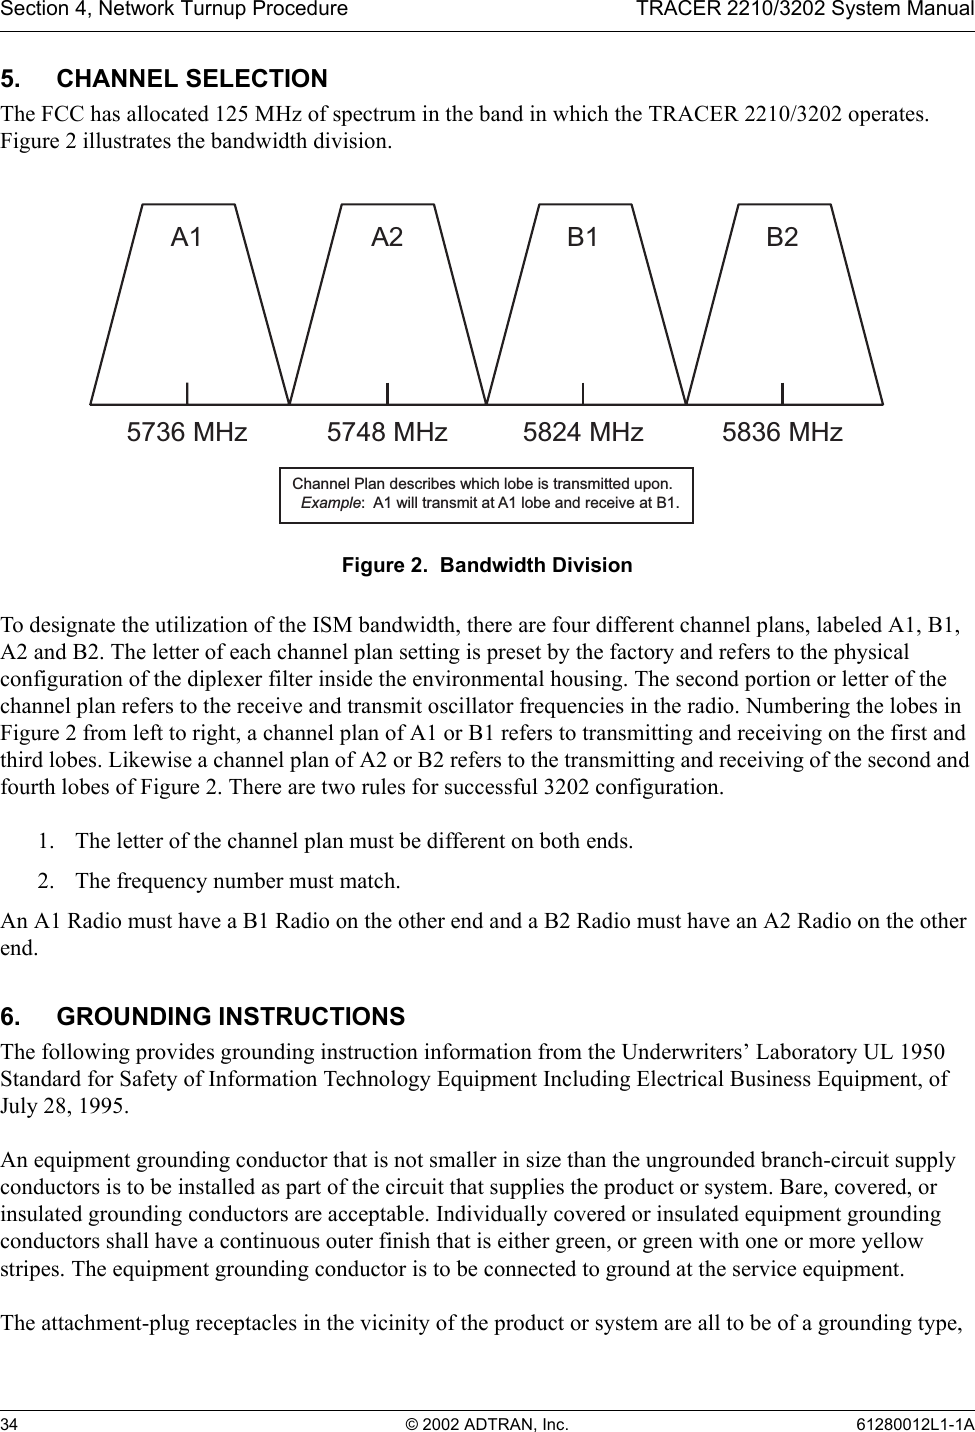 Section 4, Network Turnup Procedure TRACER 2210/3202 System Manual34 © 2002 ADTRAN, Inc. 61280012L1-1A5. CHANNEL SELECTIONThe FCC has allocated 125 MHz of spectrum in the band in which the TRACER 2210/3202 operates. Figure 2 illustrates the bandwidth division. Figure 2.  Bandwidth DivisionTo designate the utilization of the ISM bandwidth, there are four different channel plans, labeled A1, B1, A2 and B2. The letter of each channel plan setting is preset by the factory and refers to the physical configuration of the diplexer filter inside the environmental housing. The second portion or letter of the channel plan refers to the receive and transmit oscillator frequencies in the radio. Numbering the lobes in Figure 2 from left to right, a channel plan of A1 or B1 refers to transmitting and receiving on the first and third lobes. Likewise a channel plan of A2 or B2 refers to the transmitting and receiving of the second and fourth lobes of Figure 2. There are two rules for successful 3202 configuration.1. The letter of the channel plan must be different on both ends.2. The frequency number must match. An A1 Radio must have a B1 Radio on the other end and a B2 Radio must have an A2 Radio on the other end.6. GROUNDING INSTRUCTIONSThe following provides grounding instruction information from the Underwriters’ Laboratory UL 1950 Standard for Safety of Information Technology Equipment Including Electrical Business Equipment, of July 28, 1995.An equipment grounding conductor that is not smaller in size than the ungrounded branch-circuit supply conductors is to be installed as part of the circuit that supplies the product or system. Bare, covered, or insulated grounding conductors are acceptable. Individually covered or insulated equipment grounding conductors shall have a continuous outer finish that is either green, or green with one or more yellow stripes. The equipment grounding conductor is to be connected to ground at the service equipment.The attachment-plug receptacles in the vicinity of the product or system are all to be of a grounding type, A15736 MHzA25748 MHzB15824 MHzB25836 MHzChannel Plan describes which lobe is transmitted upon.  Example:  A1 will transmit at A1 lobe and receive at B1.